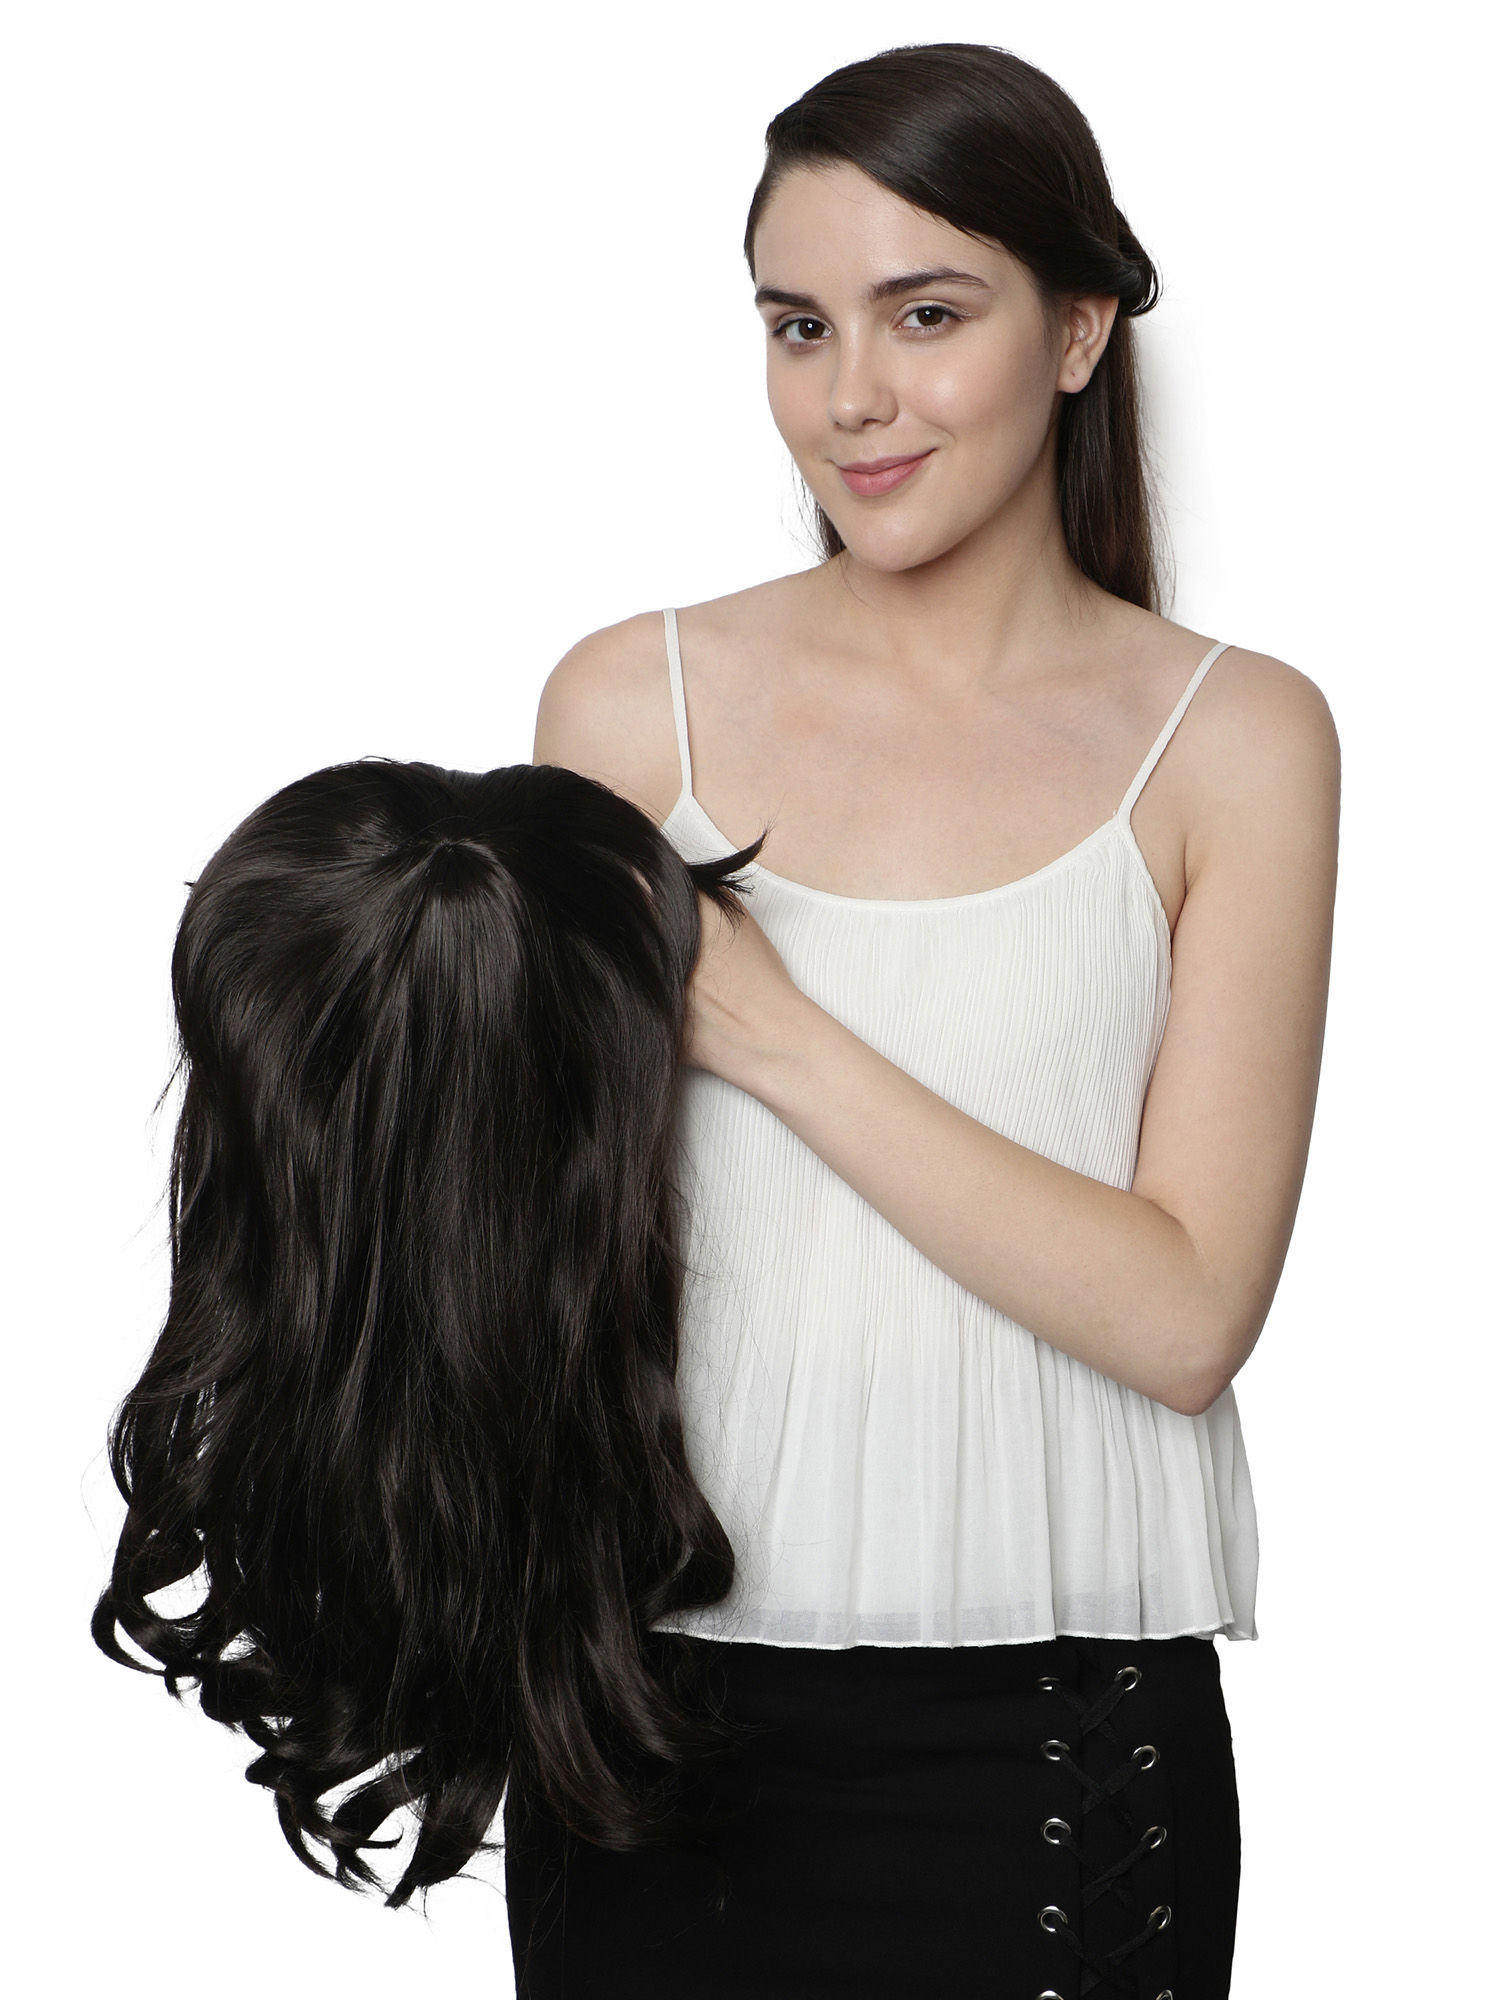 Hair Wig in Indore, हेयर विग, इंदौर, Madhya Pradesh | Get Latest Price from  Suppliers of Hair Wig, Hair Patch in Indore